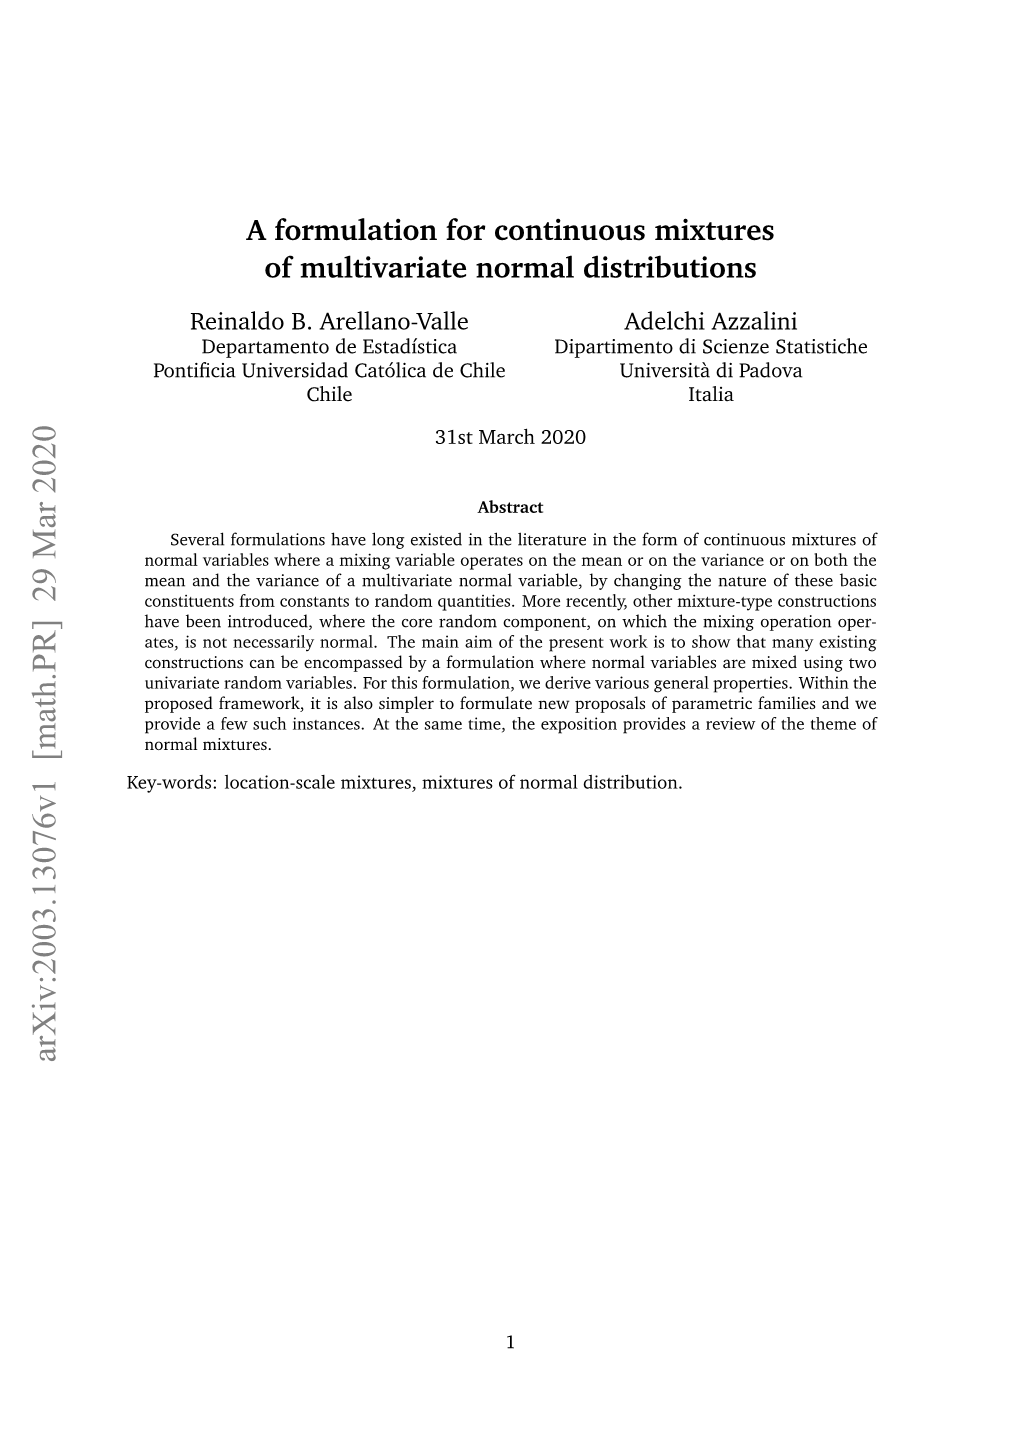 A Formulation for Continuous Mixtures of Multivariate Normal Distributions